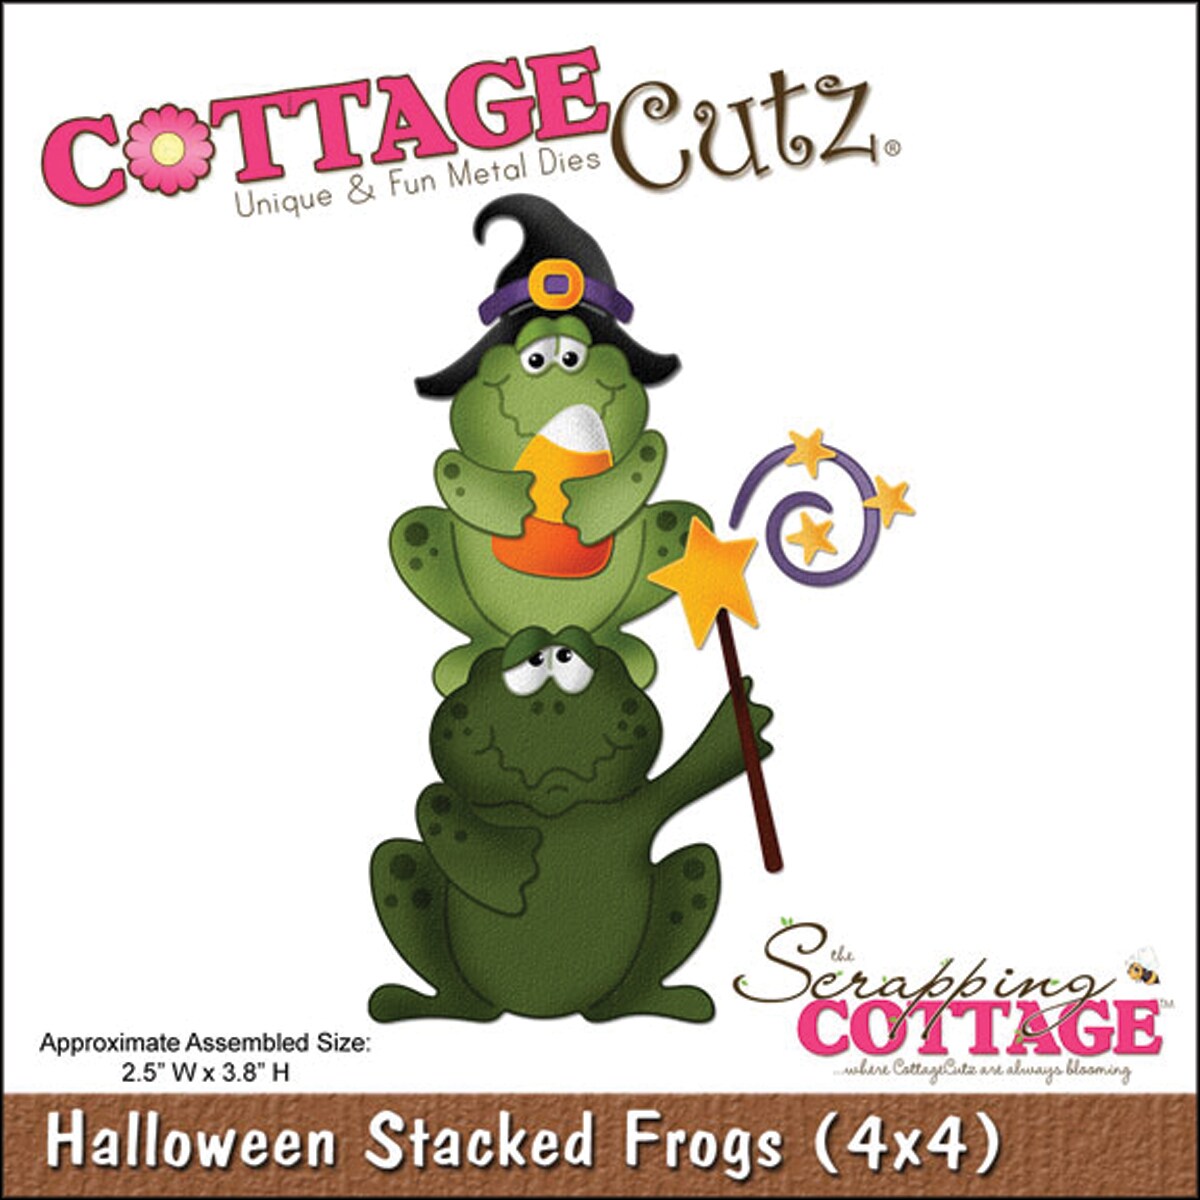 CottageCutz Halloween Stacked Frogs 4x4 inch Die Today $17.49